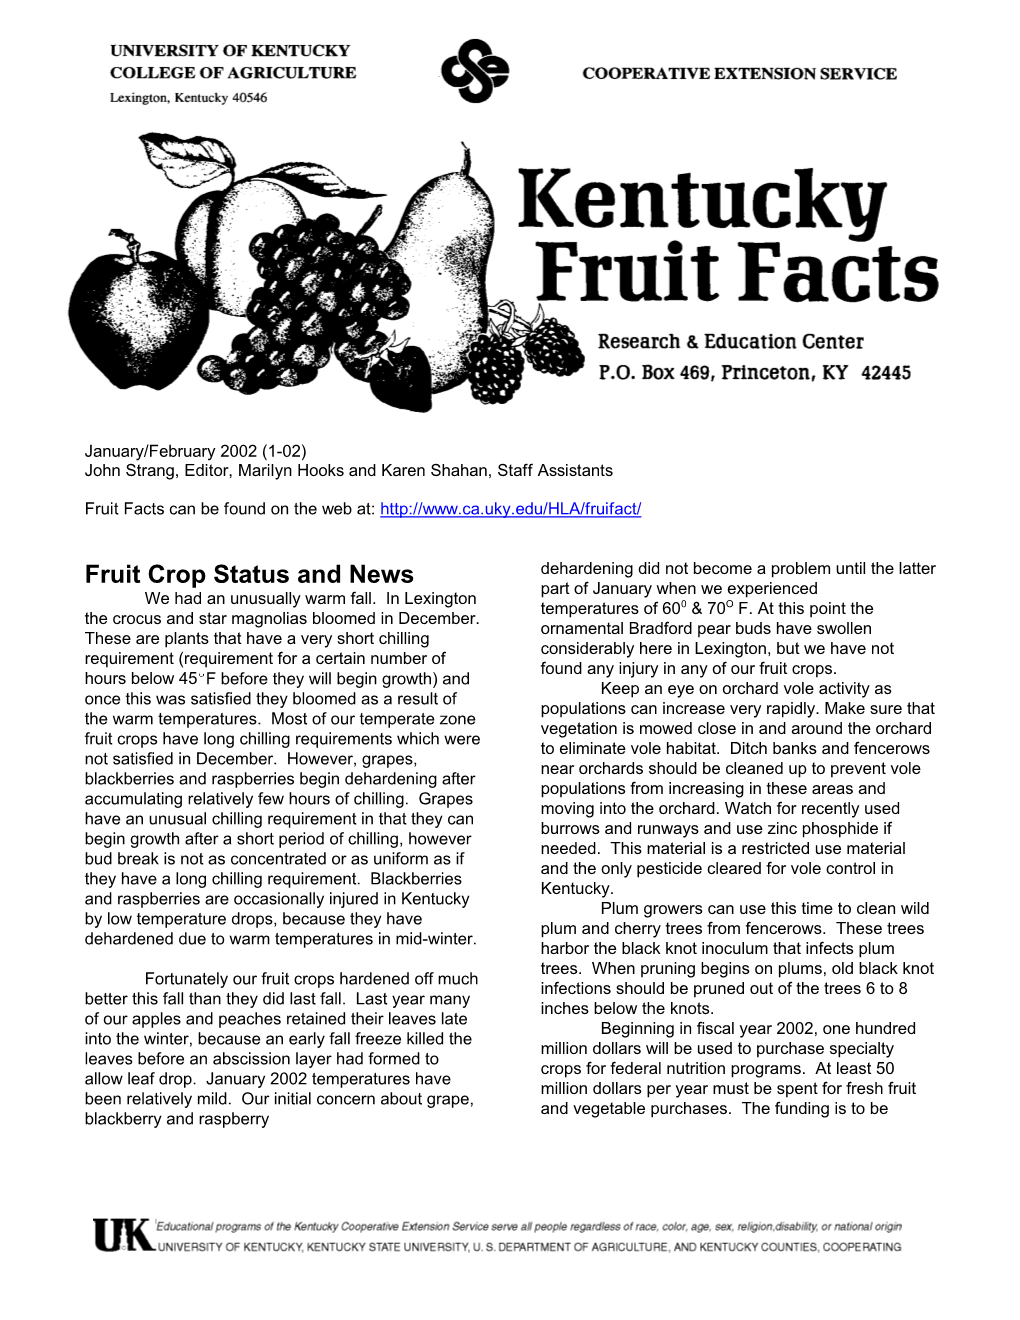 Fruit Crop Status and News Dehardening Did Not Become a Problem Until the Latter Part of January When We Experienced We Had an Unusually Warm Fall